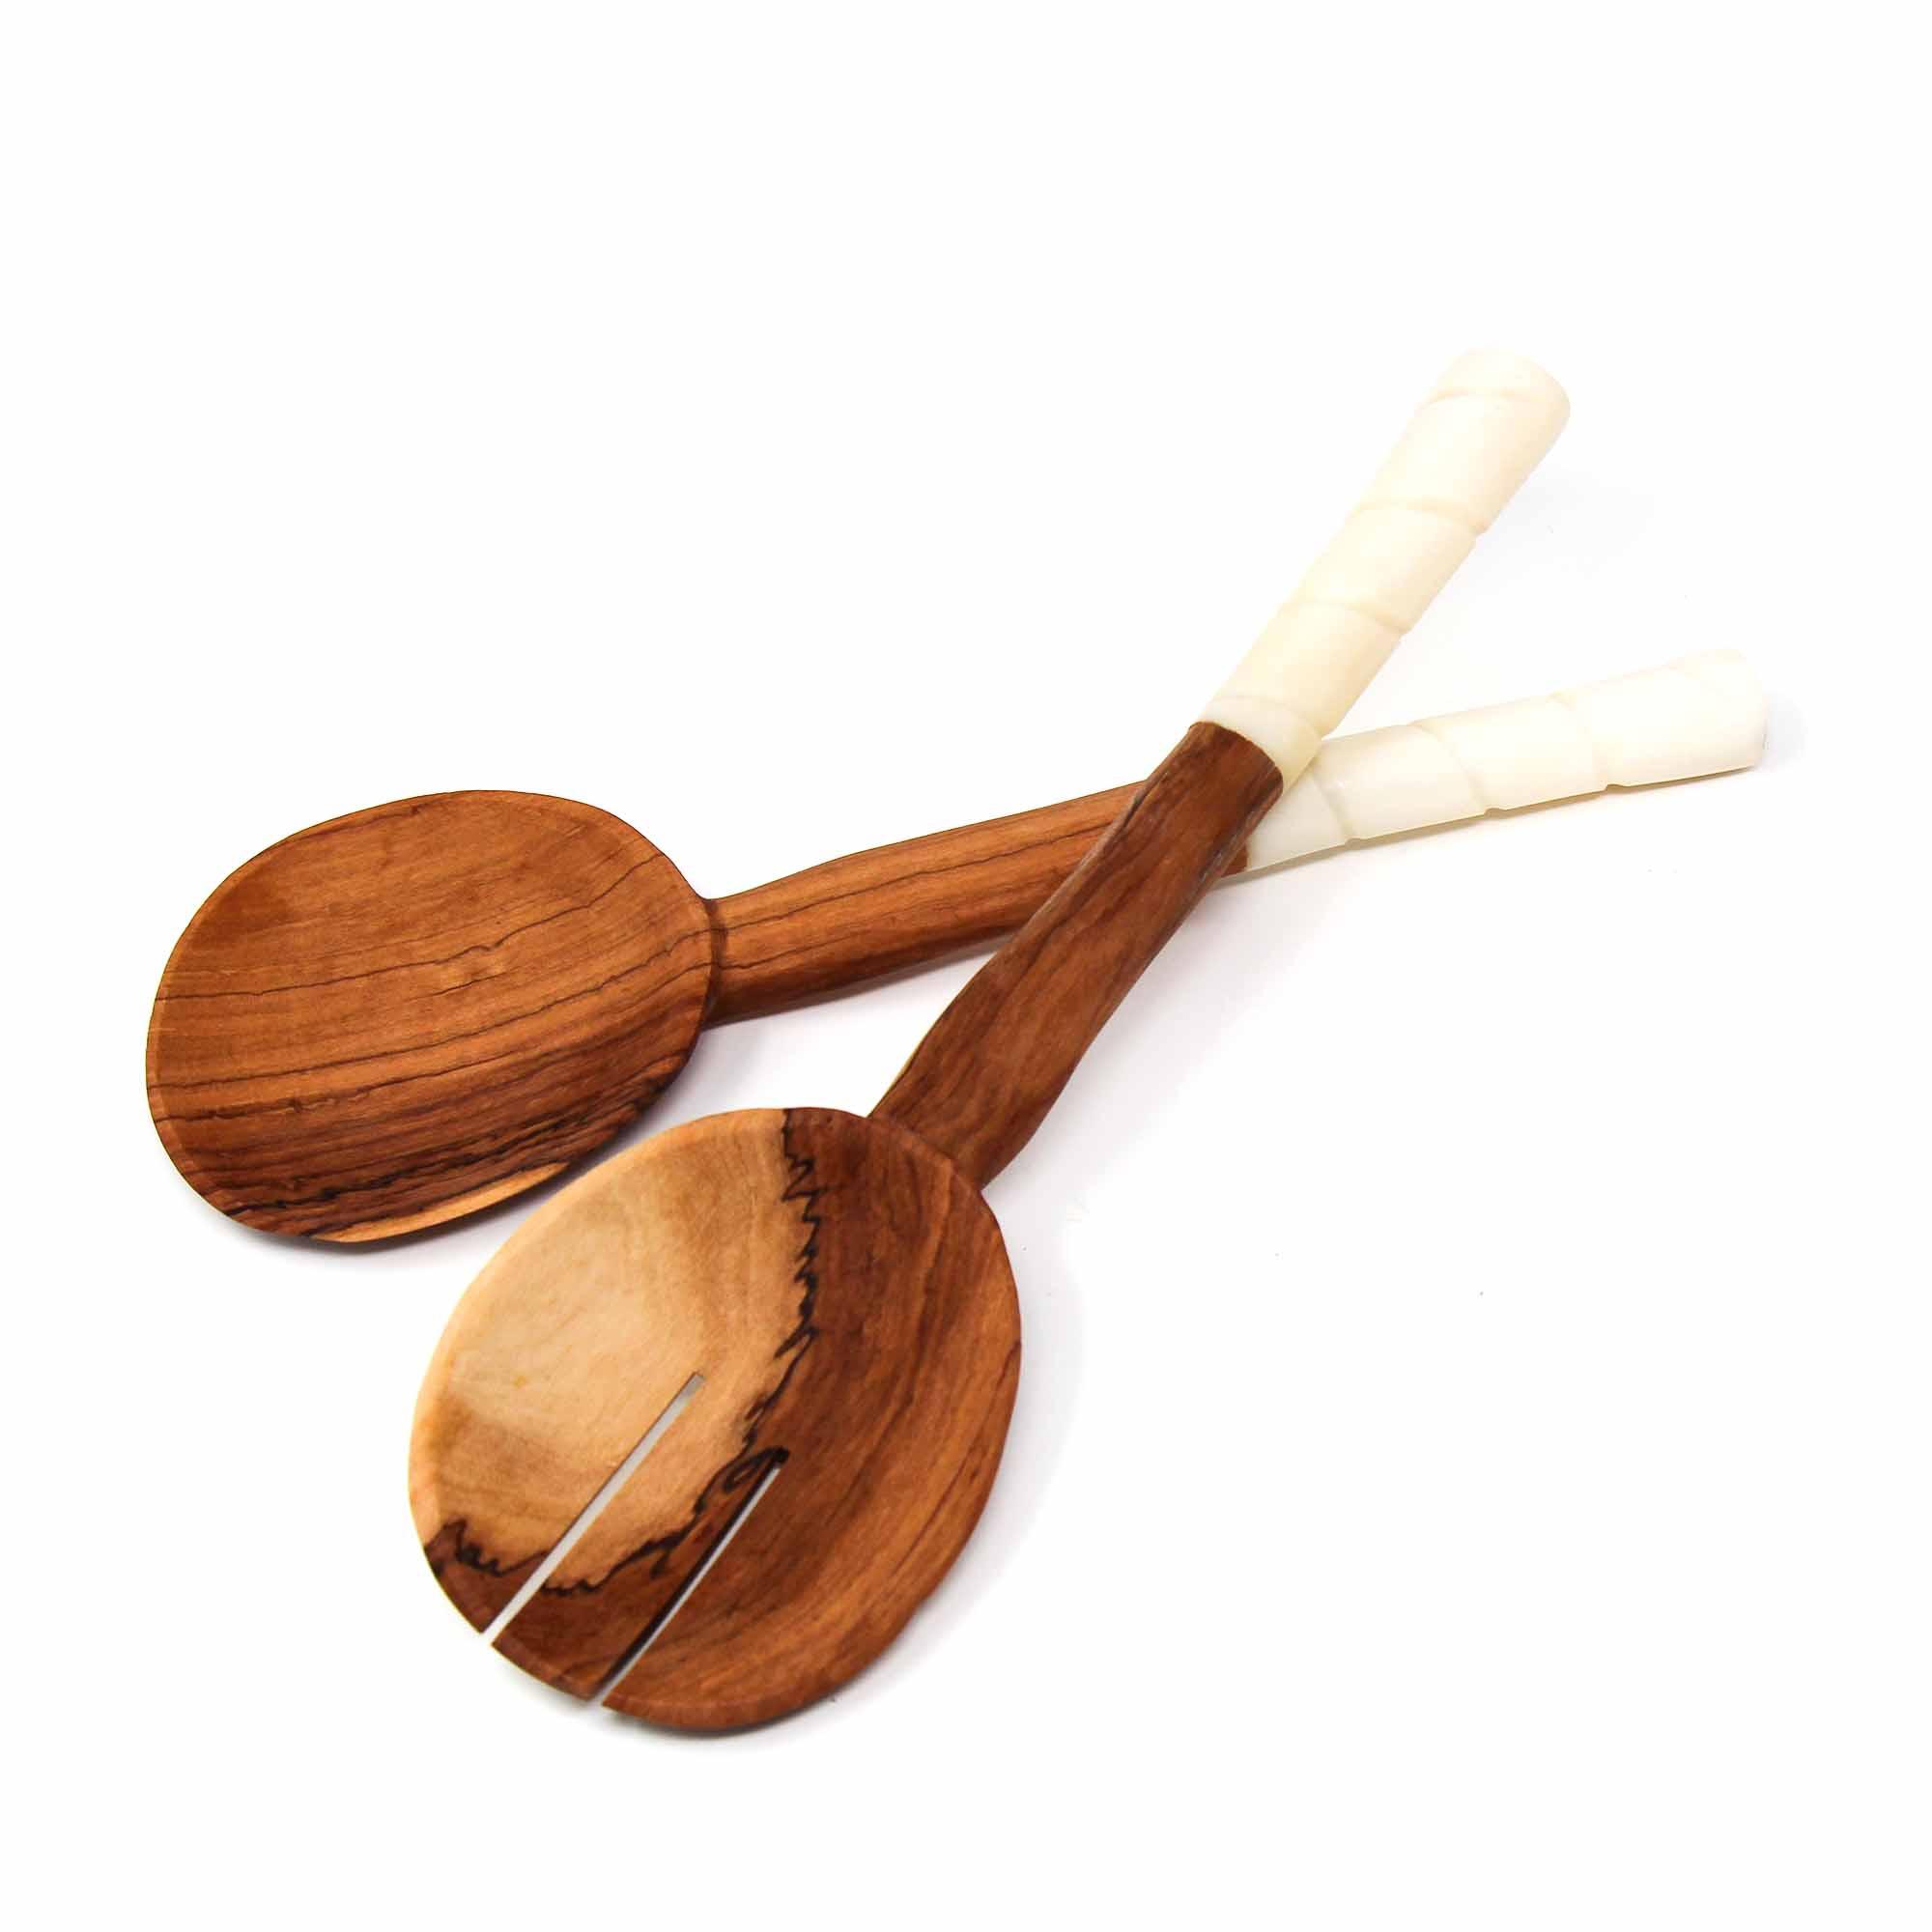 ethically sourced Olive Wood Salad Servers with Bone Handles Life In Alignment